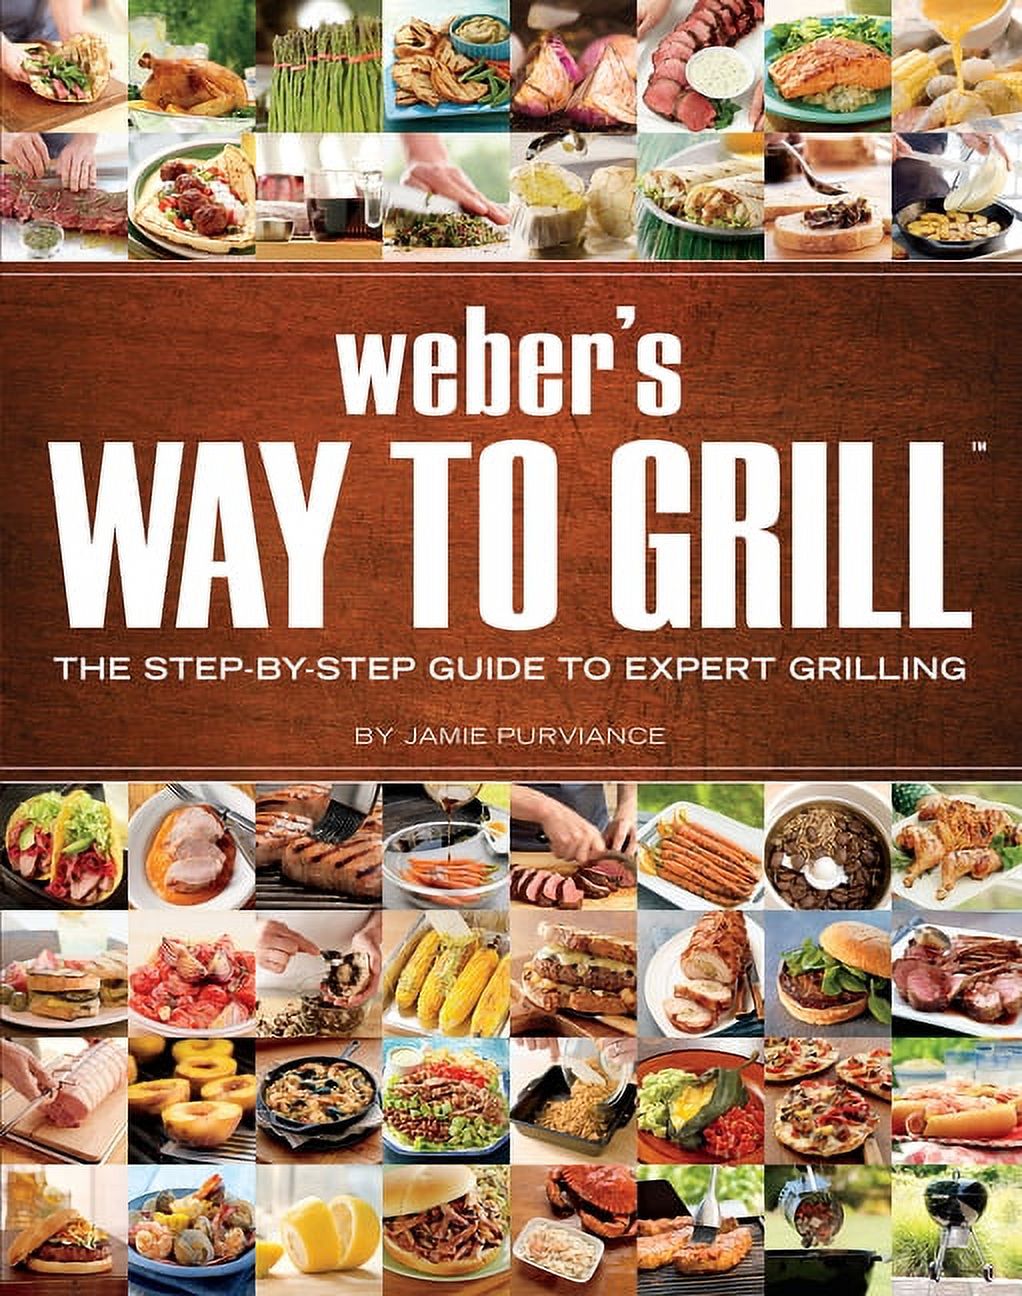 Sunset Books: Weber's Way to Grill: The Step-By-Step Guide to Expert Grilling (Paperback) - image 1 of 3